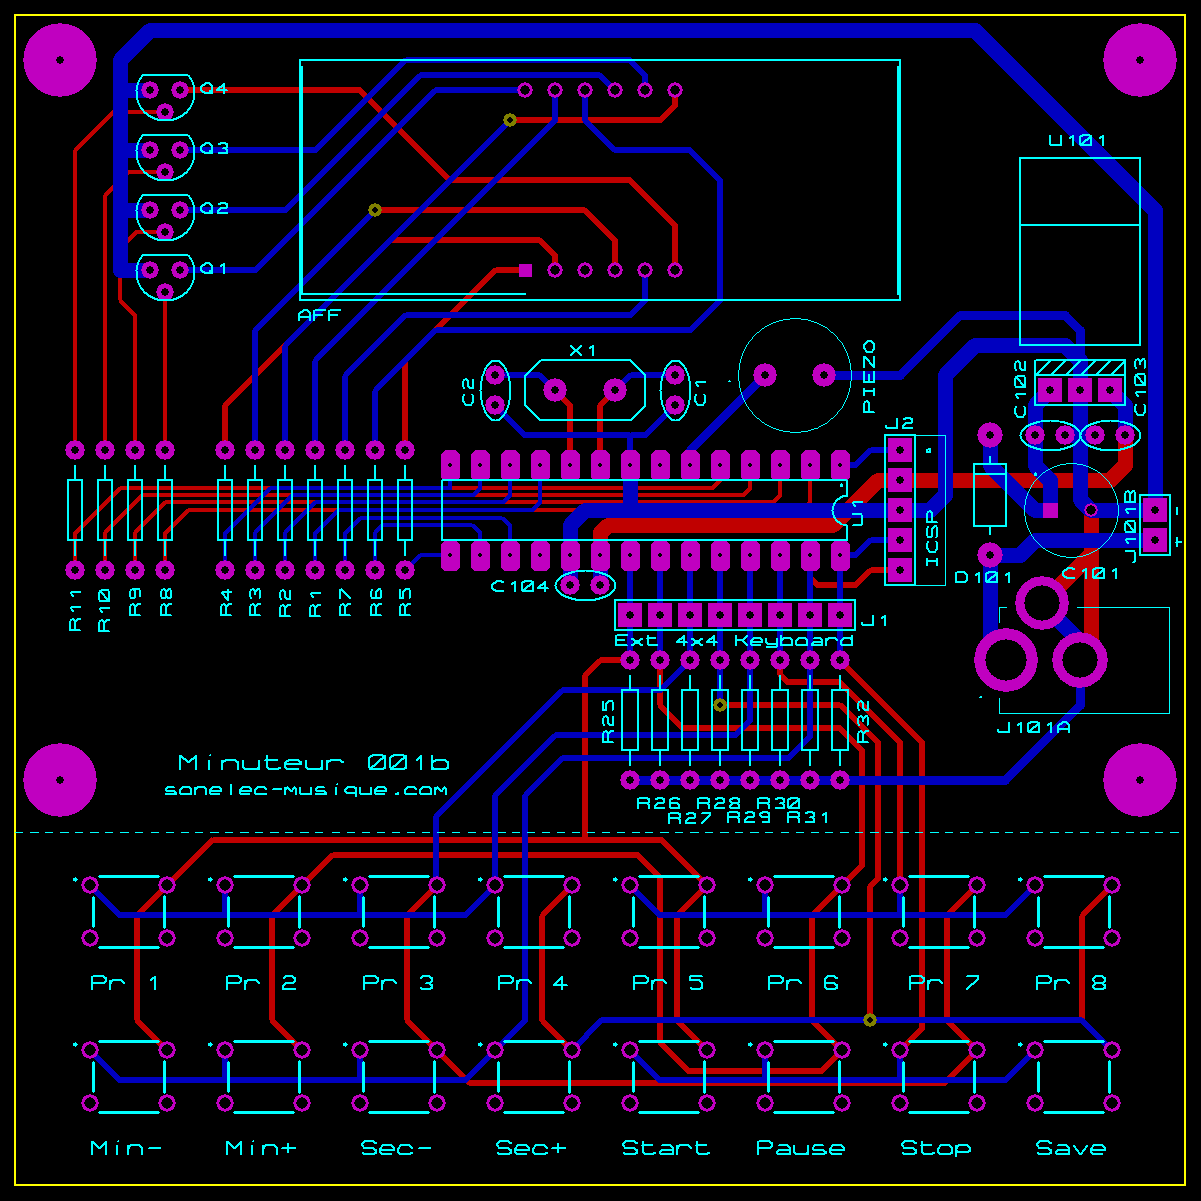 minuterie_001b_pcb_components-top